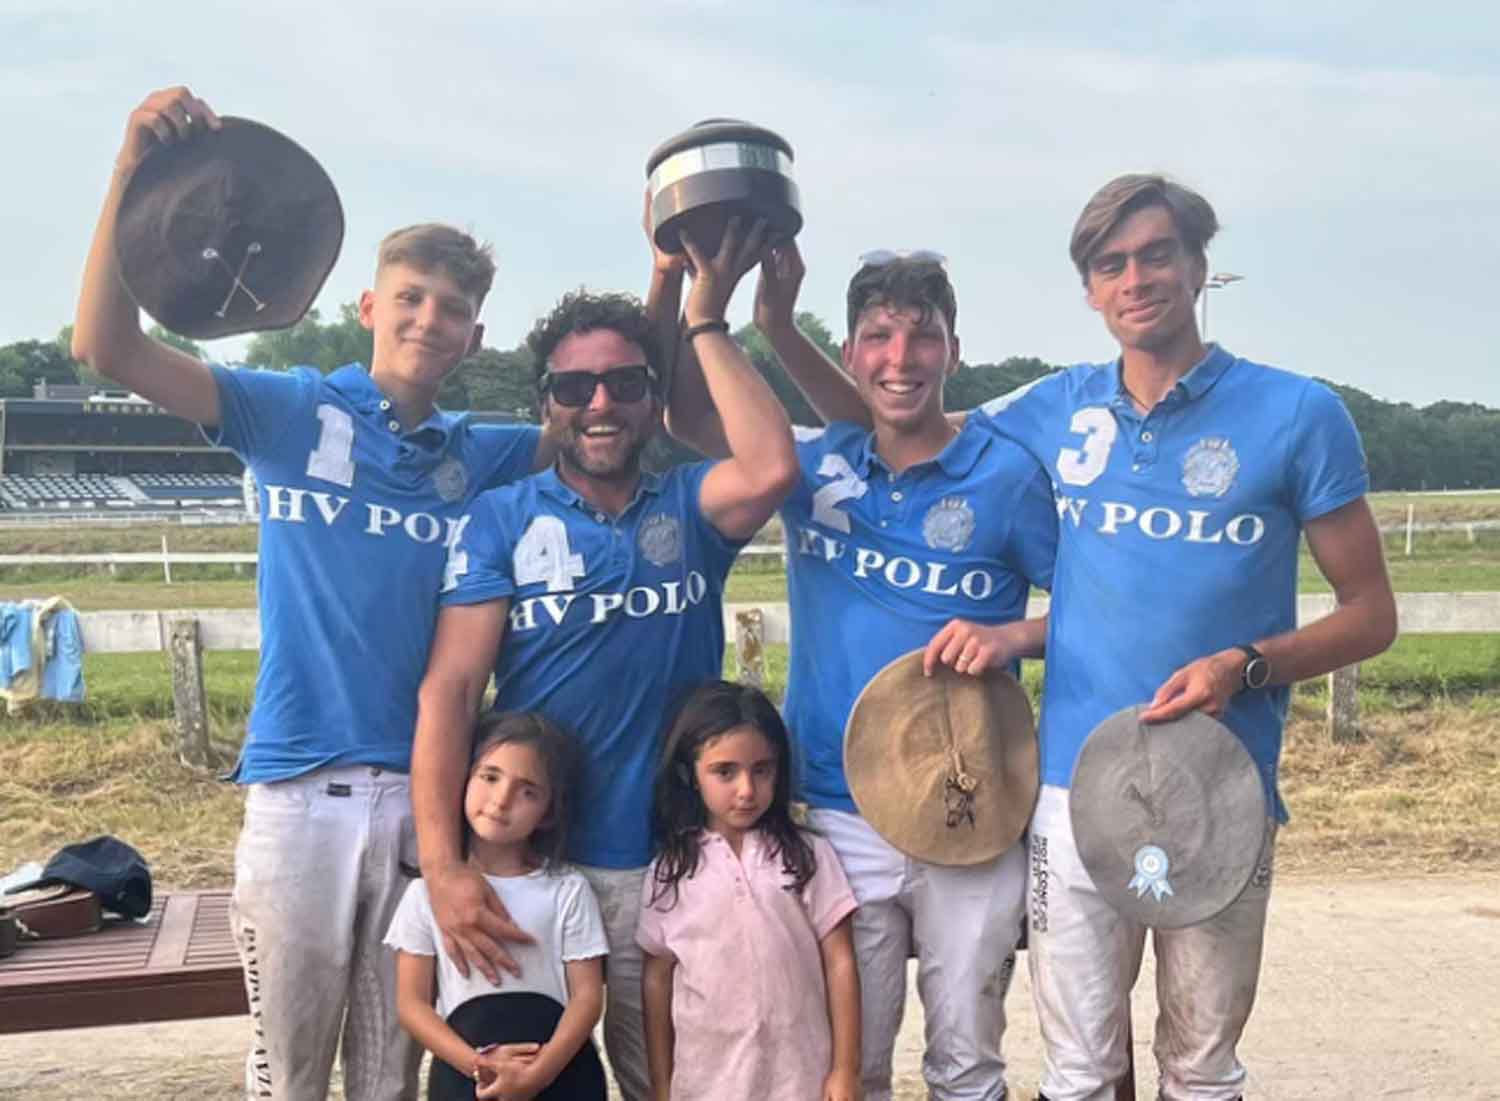 HV POLO wins the TROPHY ARGENTINA 2022 !